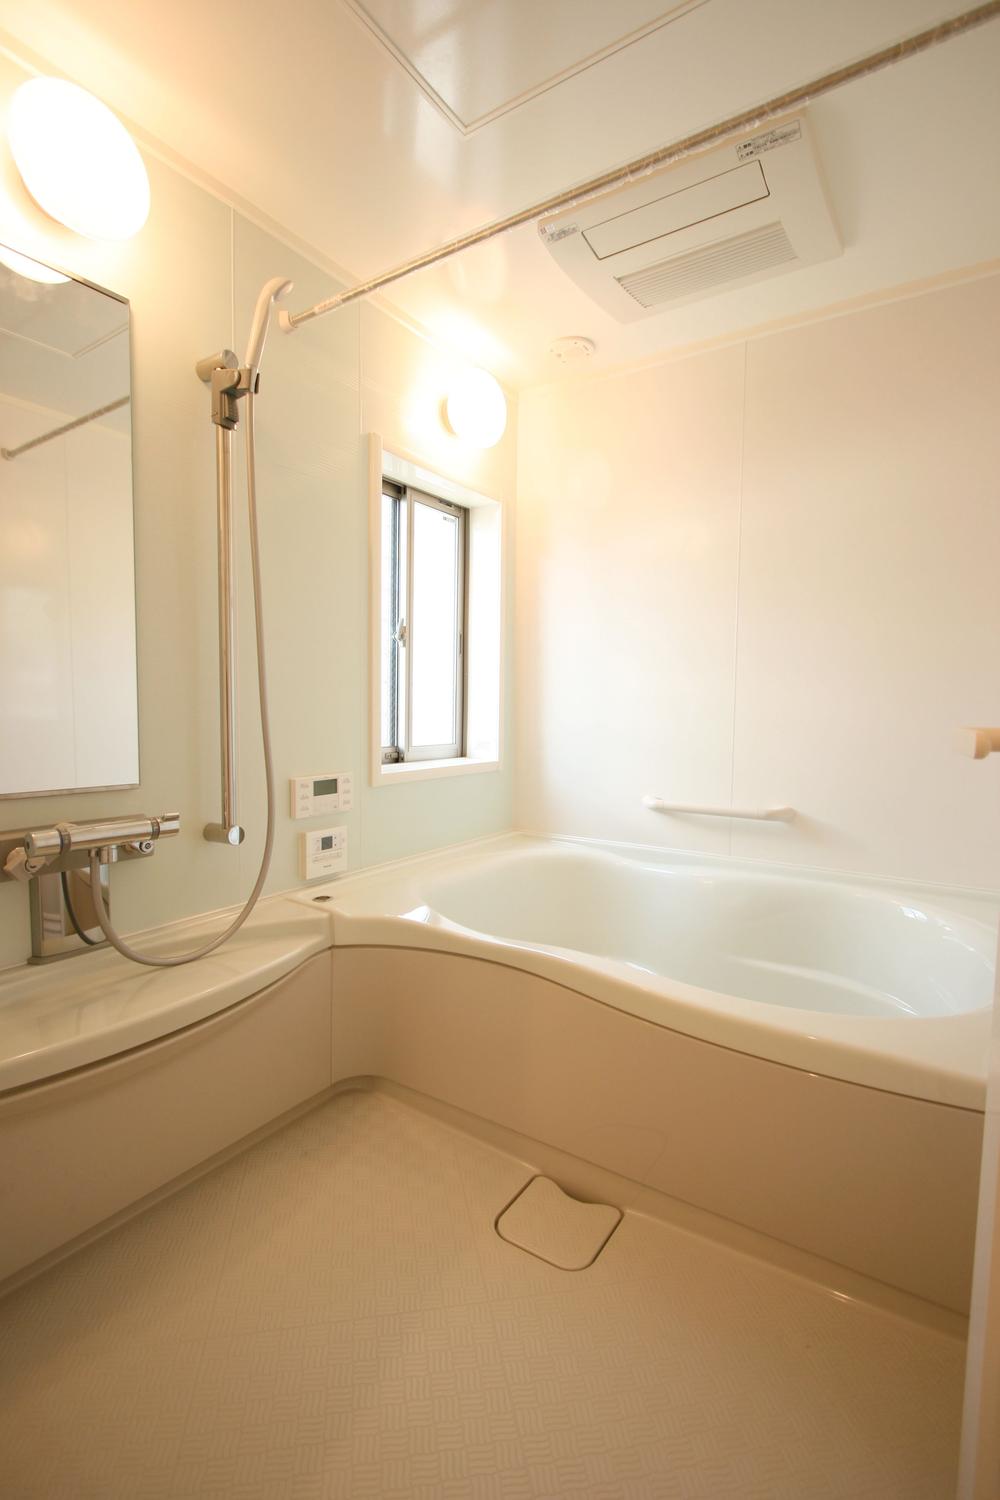 Same specifications photo (bathroom). Our construction cases Bathroom 1 tsubo!  Mist sauna + is a surround system boasts a bathroom of standard equipment.